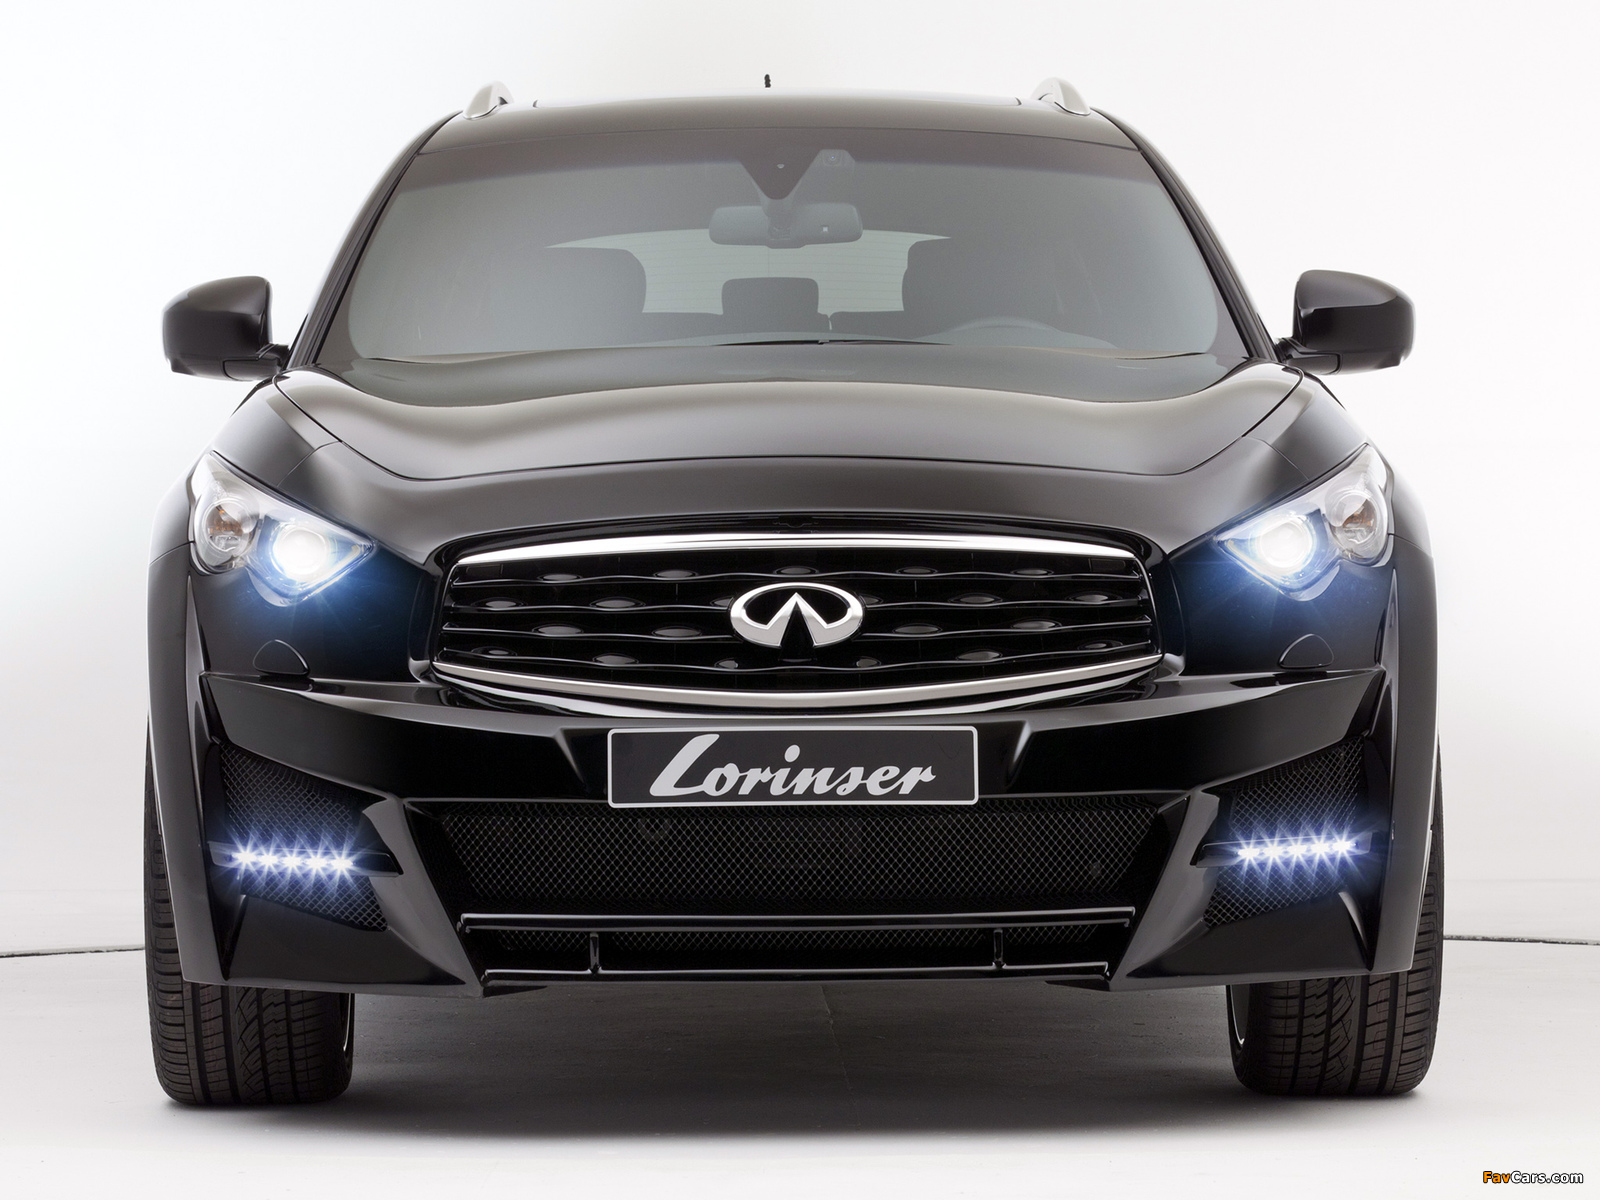 Lorinser Infiniti FX30dS (S51) 2011 pictures (1600 x 1200)